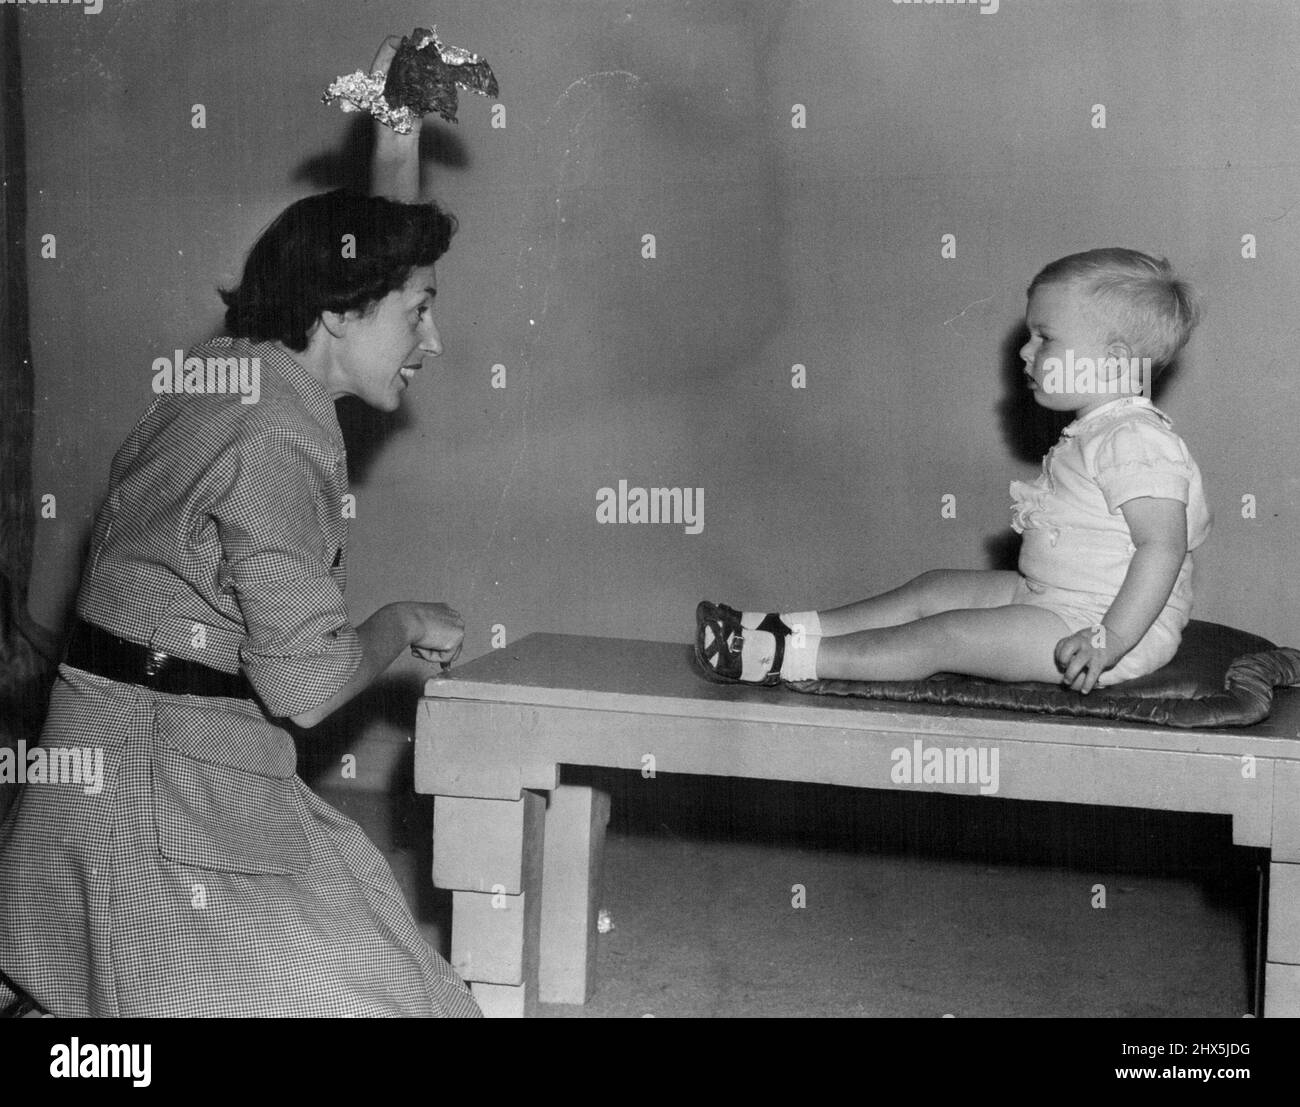 Shmith's sister, Verna, uses no toys to cajole young sitters but a natural sense of fun. Her brother watches carefully for the picture. May 24, 1950. Stock Photo